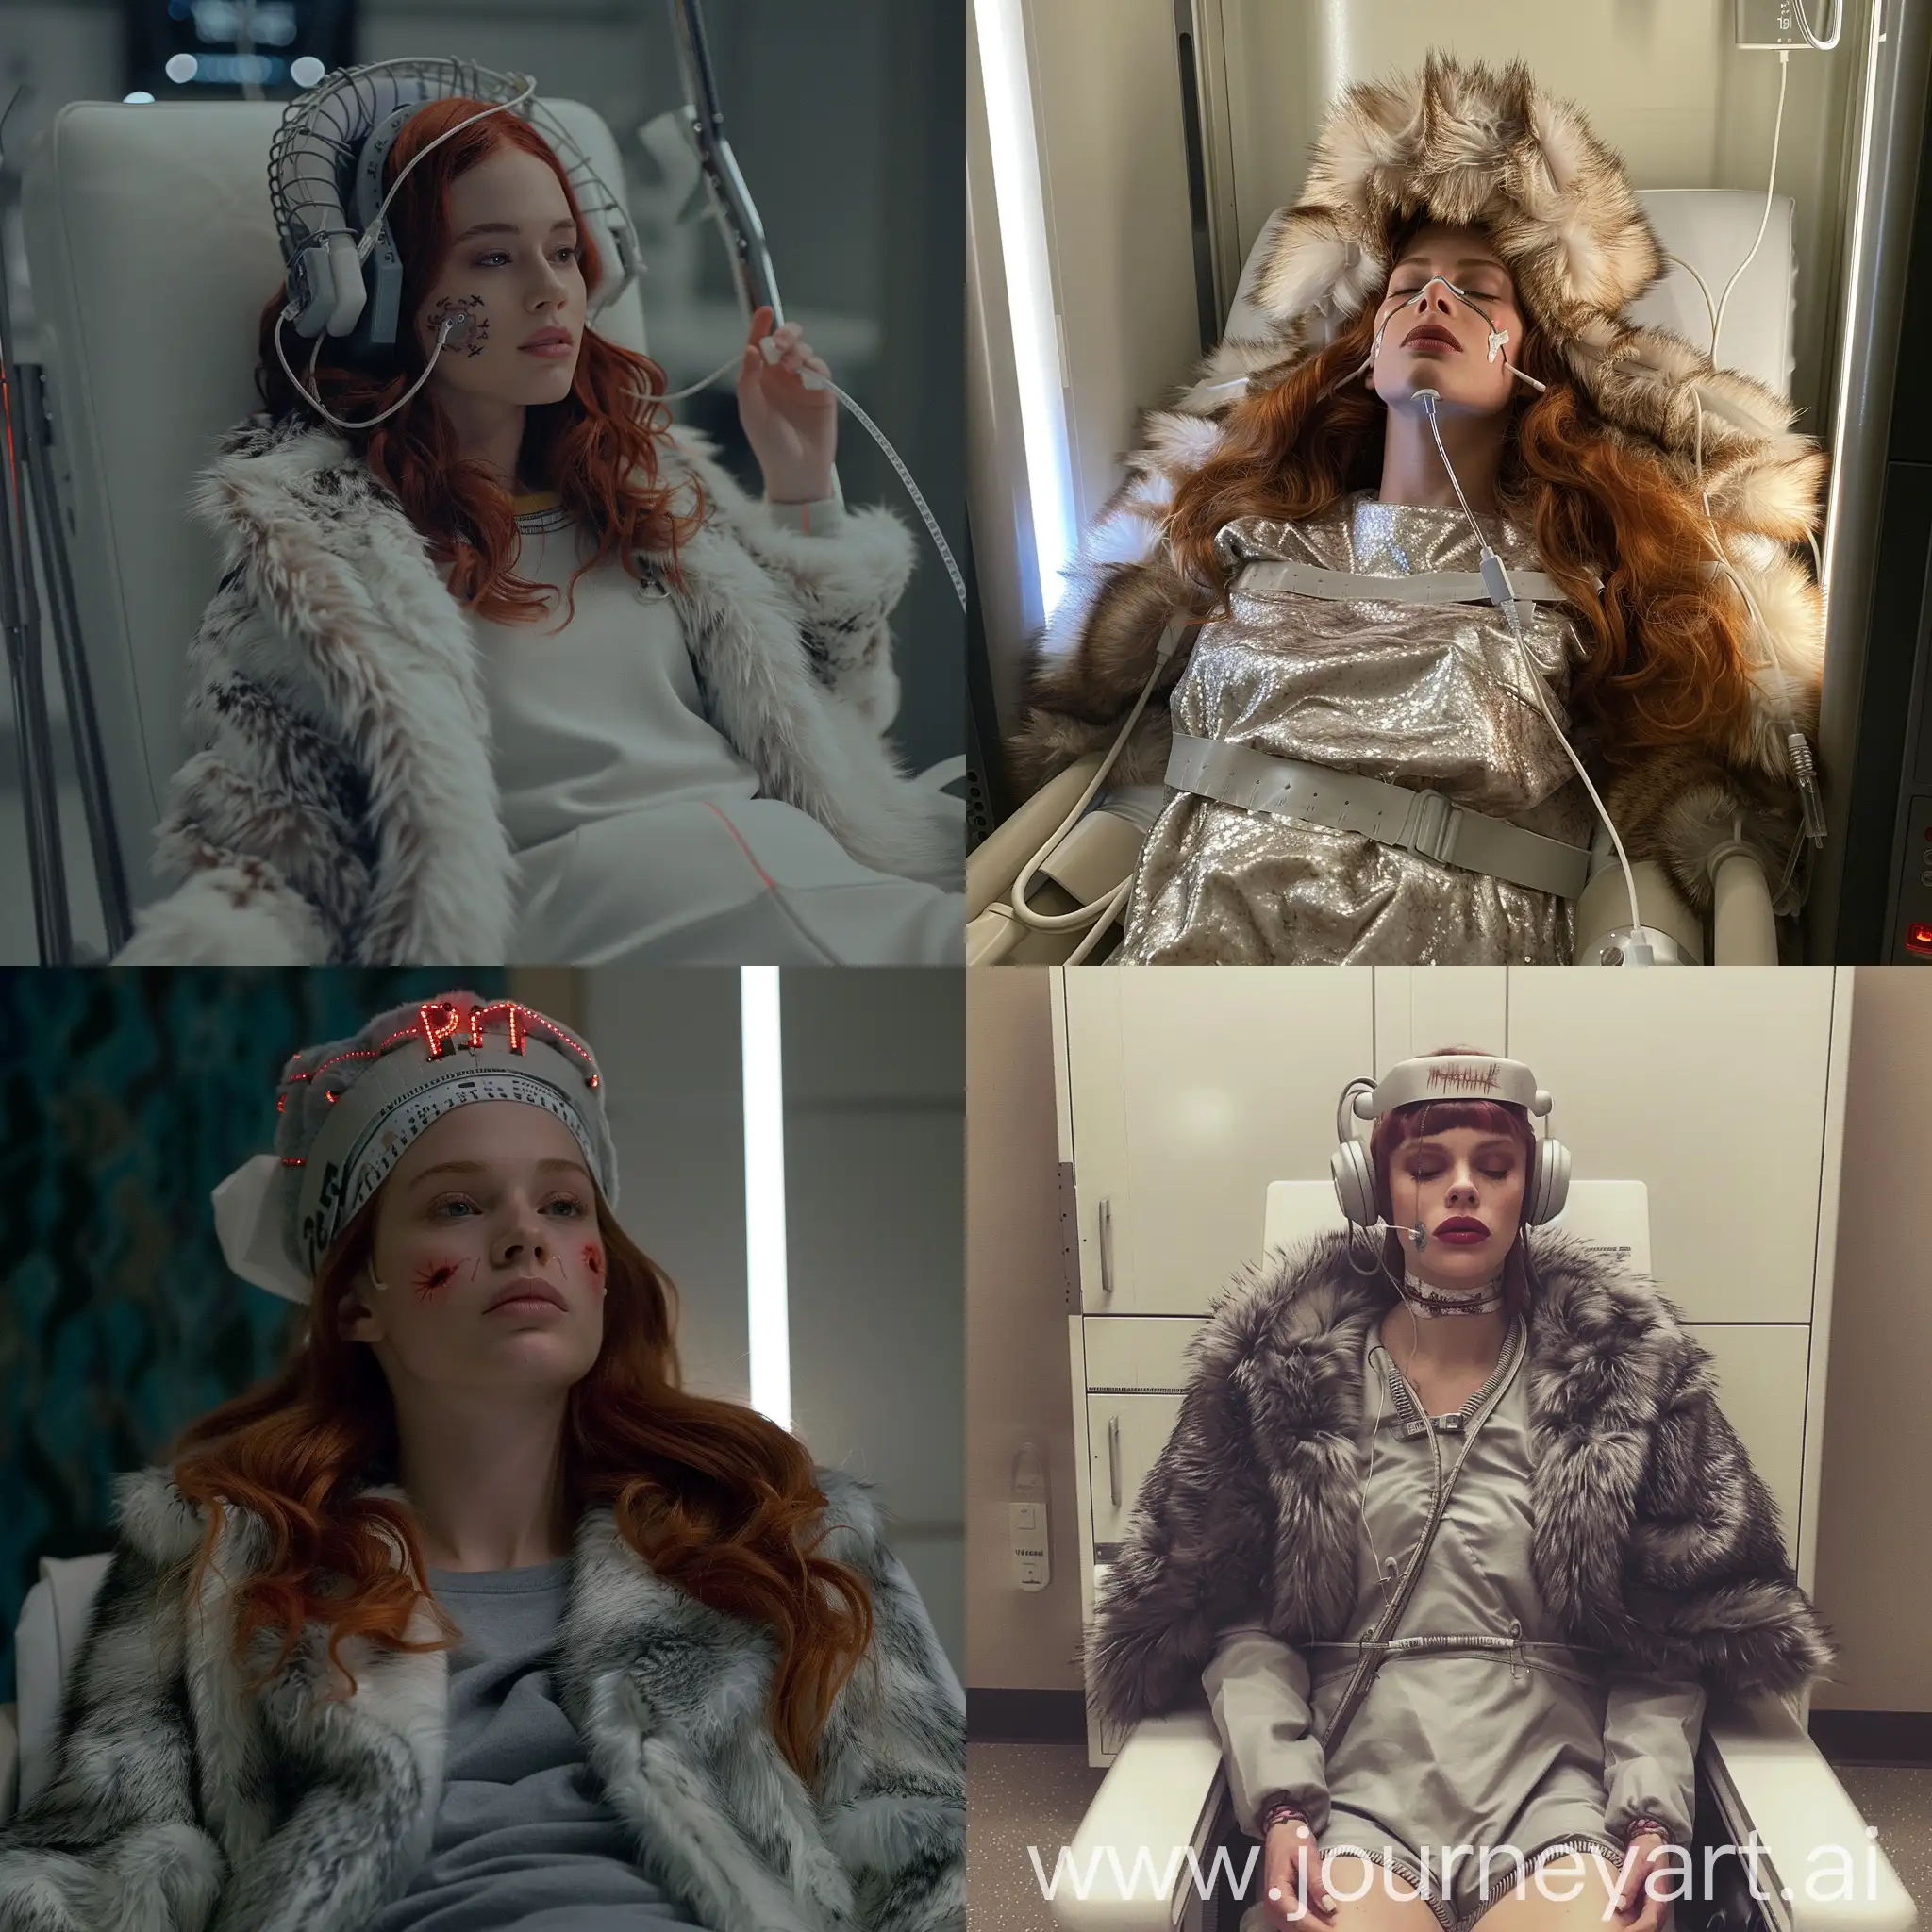 Actress-Madelaine-Petsch-in-Fur-Medical-Patient-Attire-Undergoing-Electroconvulsive-Therapy